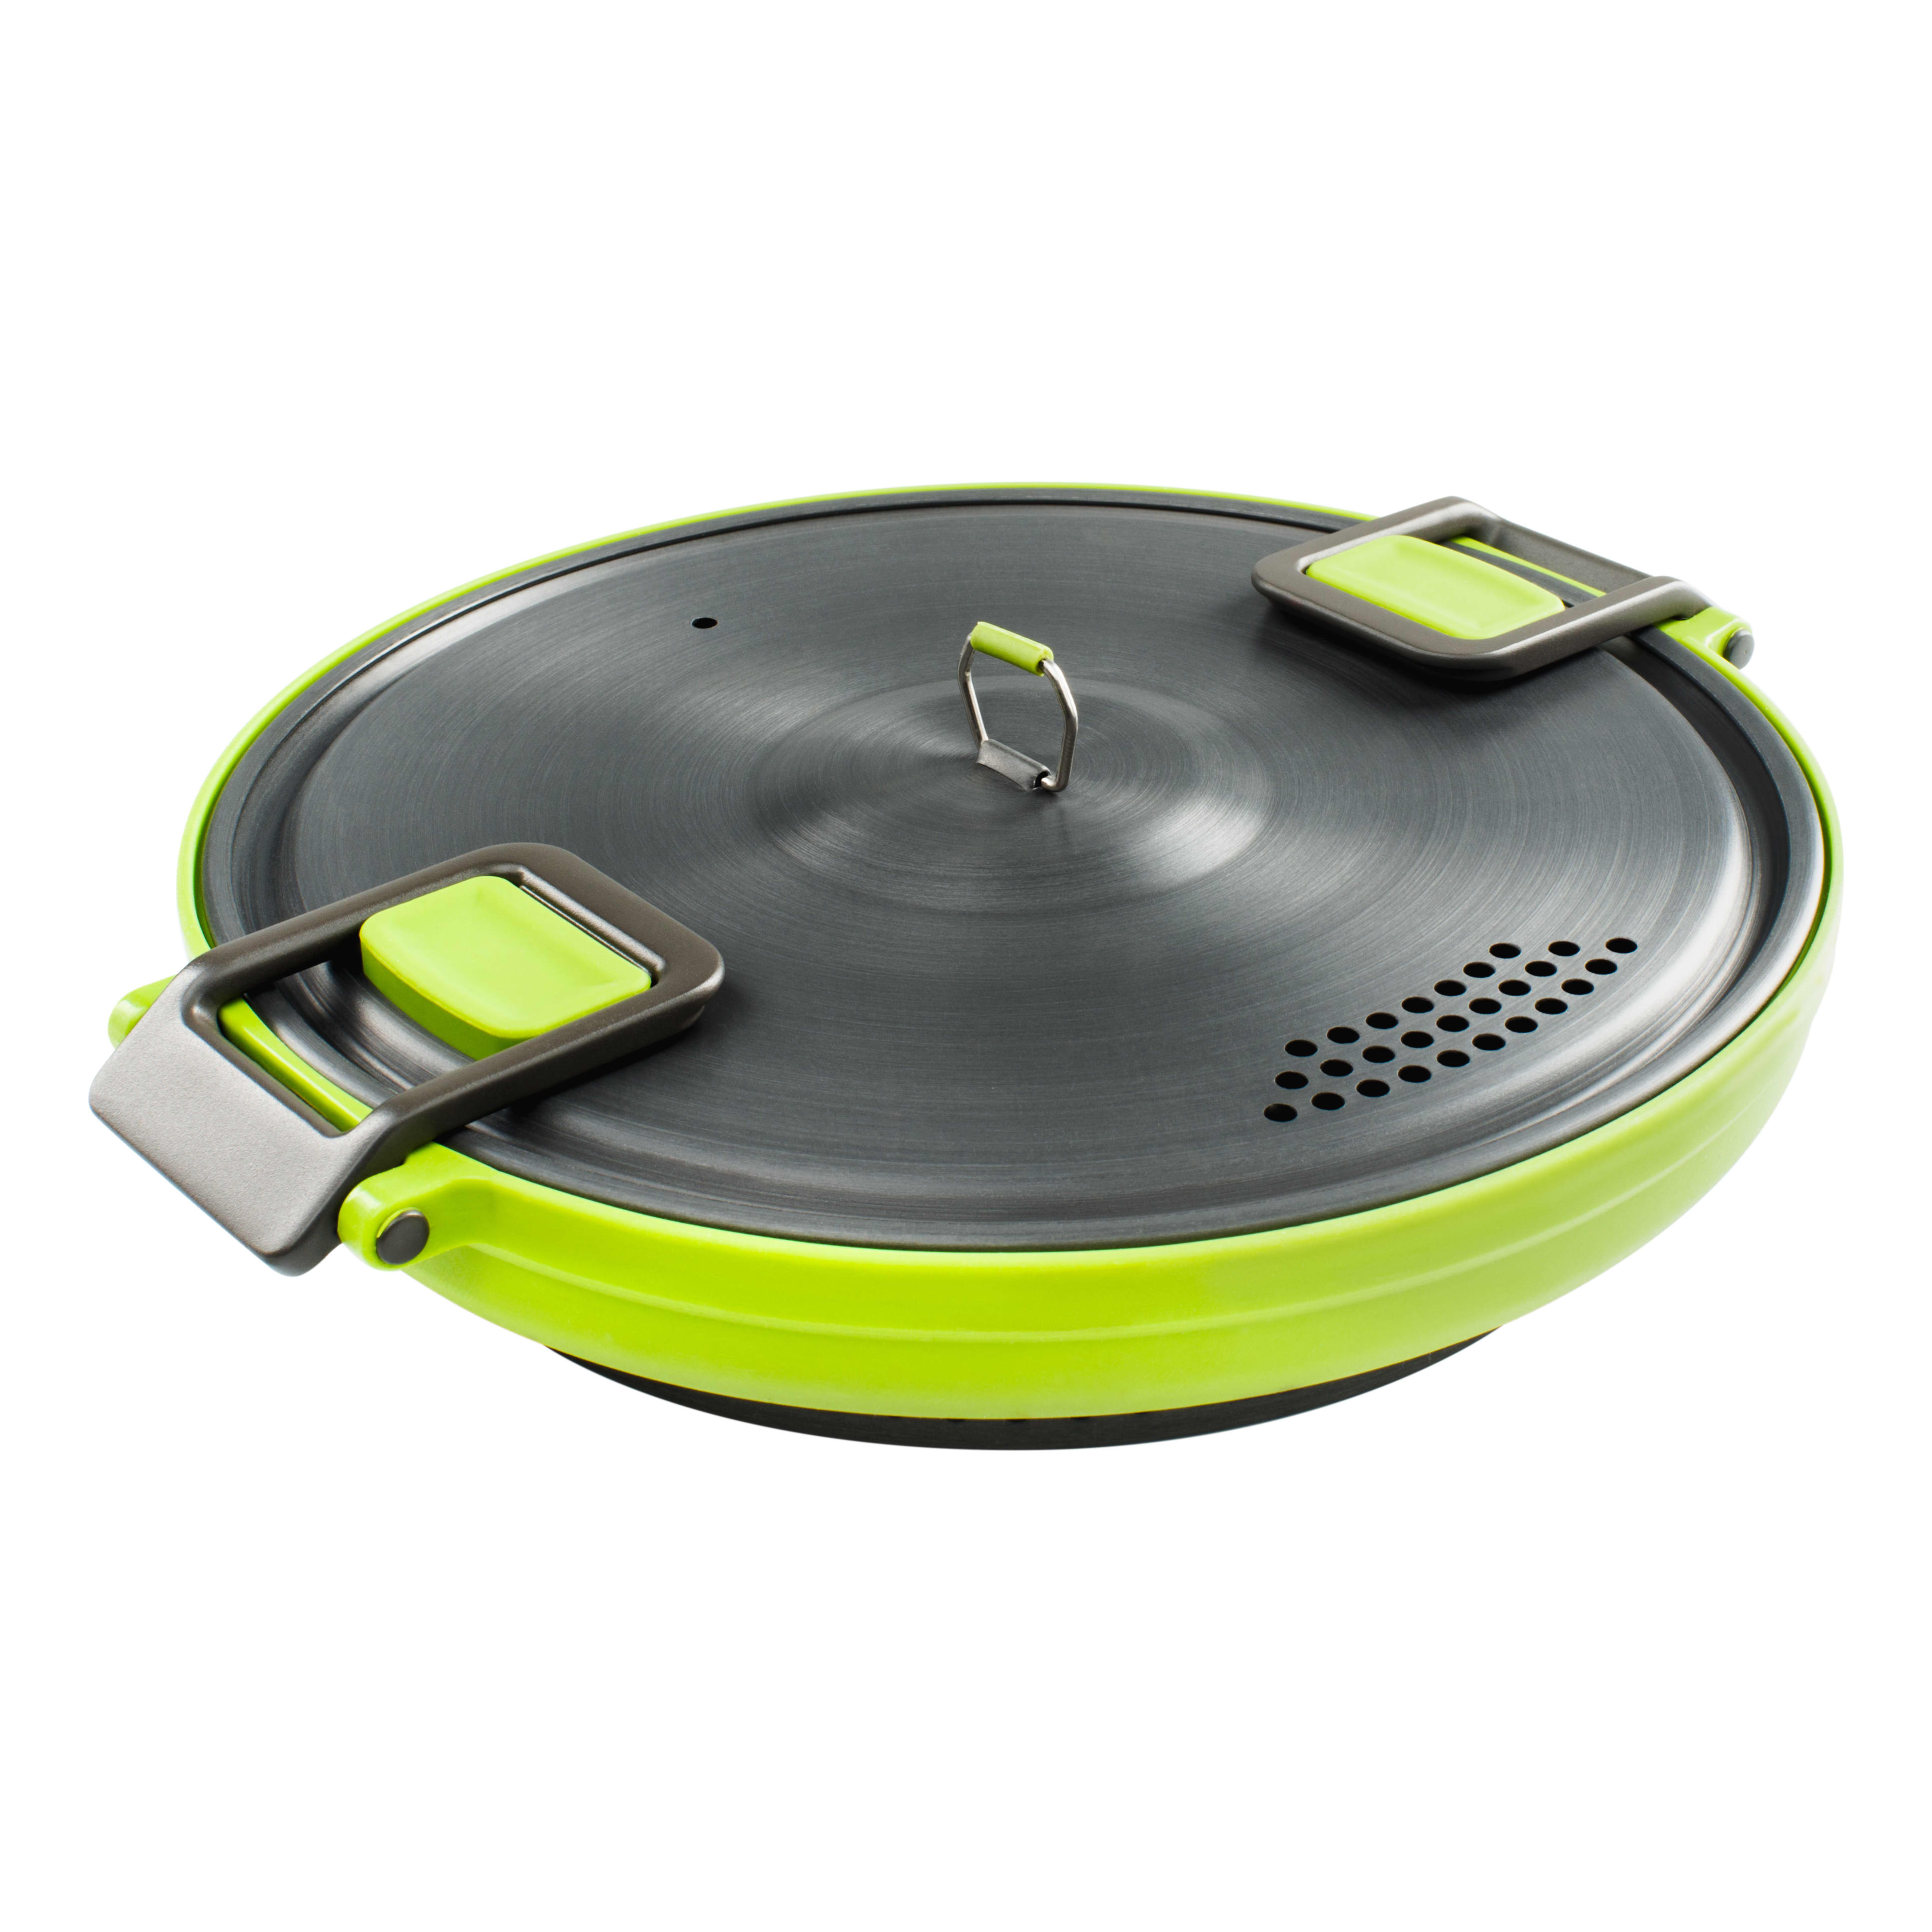 GSI Outdoors Escape HS 3 Litre Collapsible Pot - Collapsed View